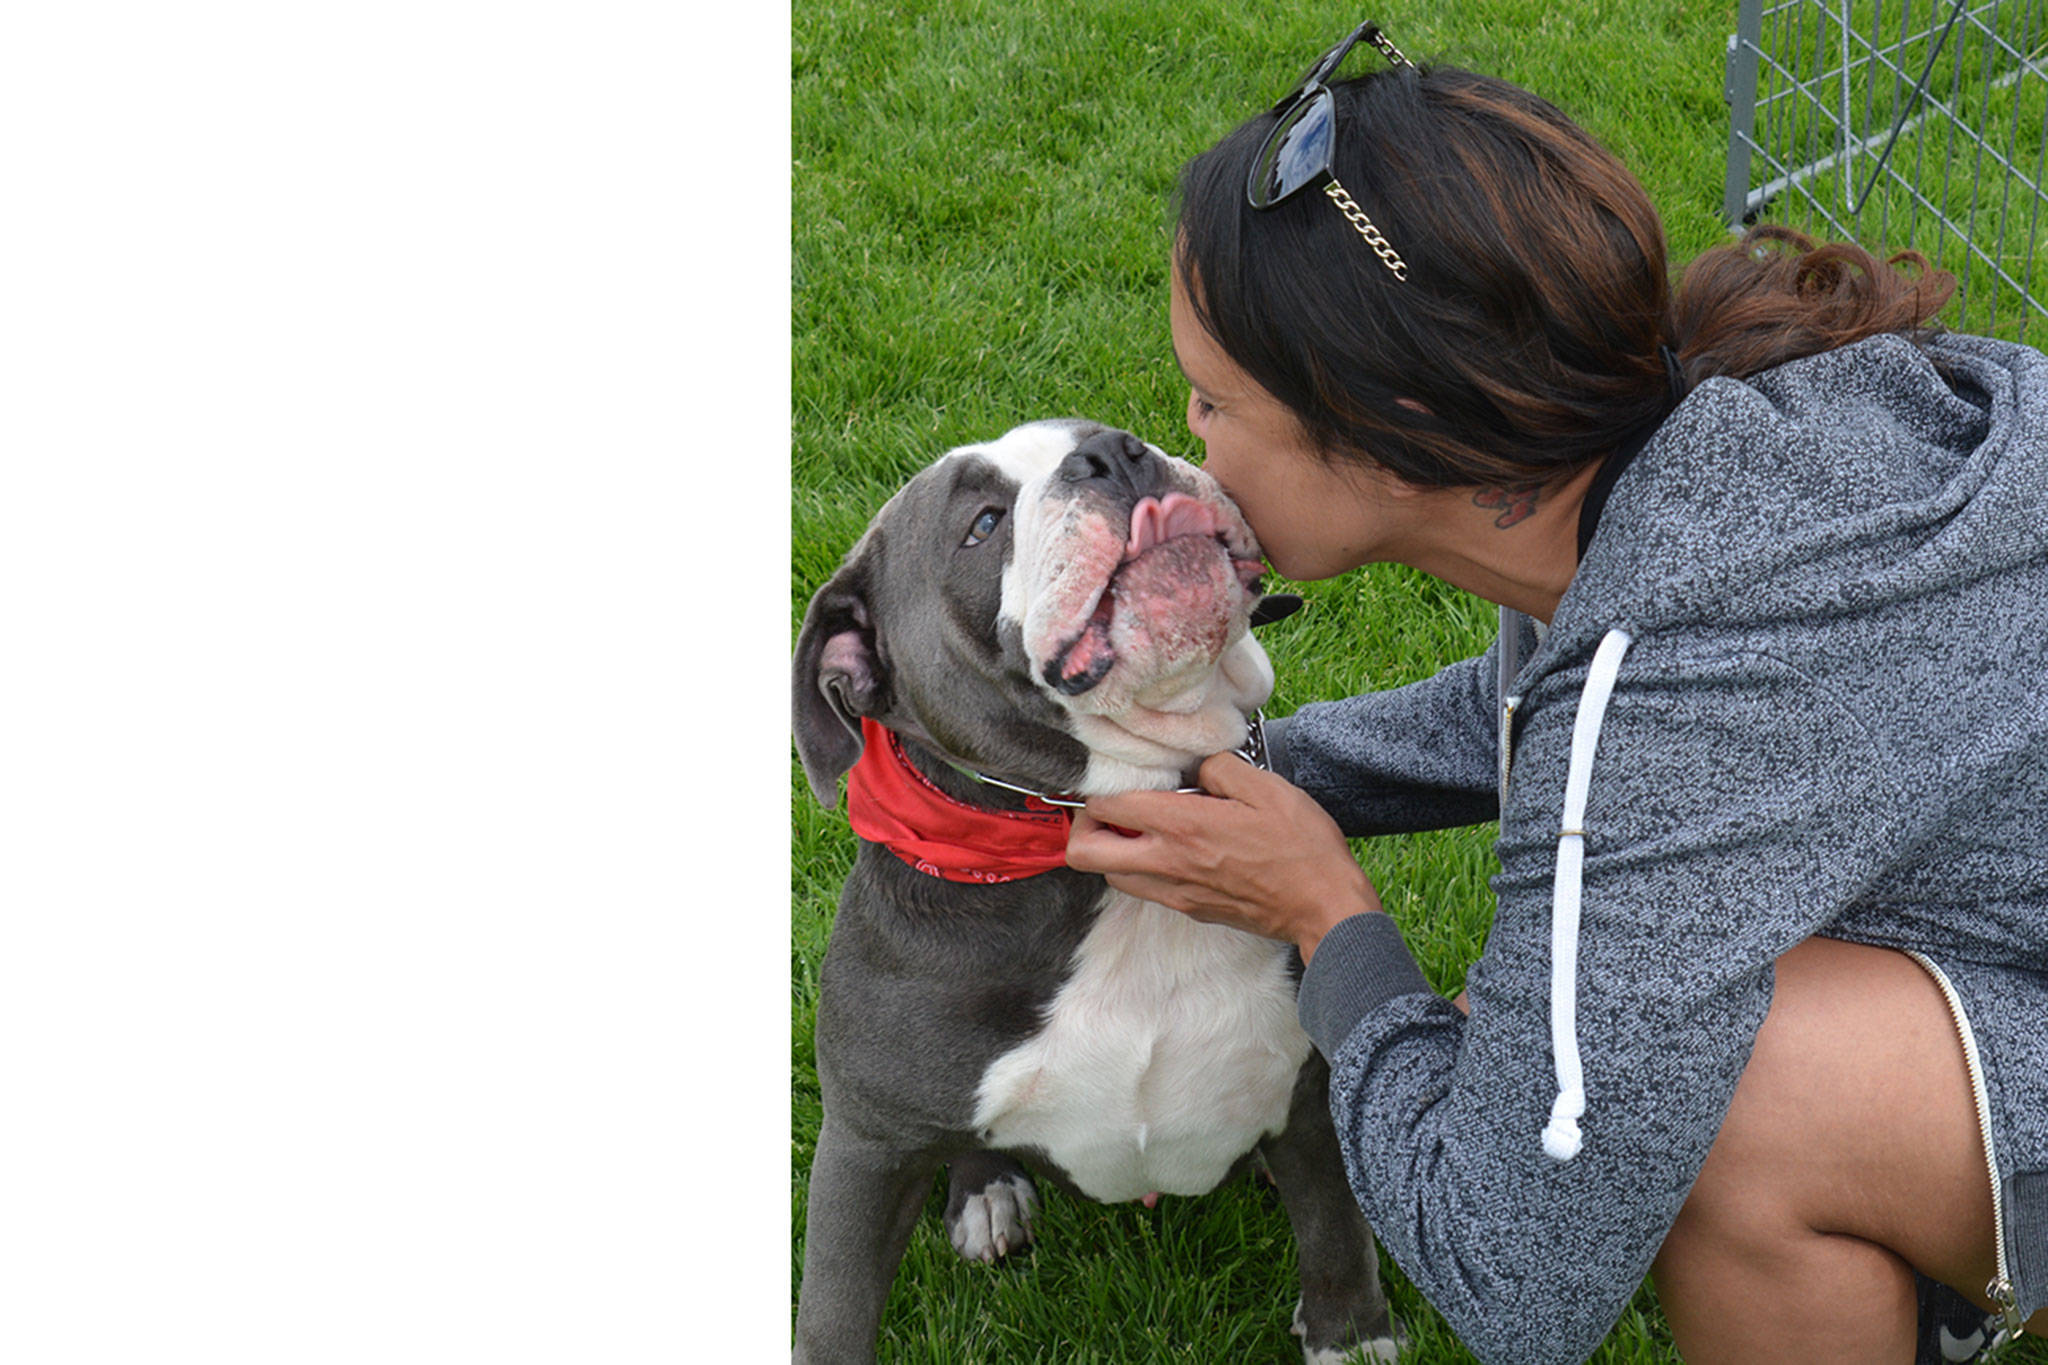 Smooch pooch just one attraction at Marysville’s outdoor dog show (slide show)